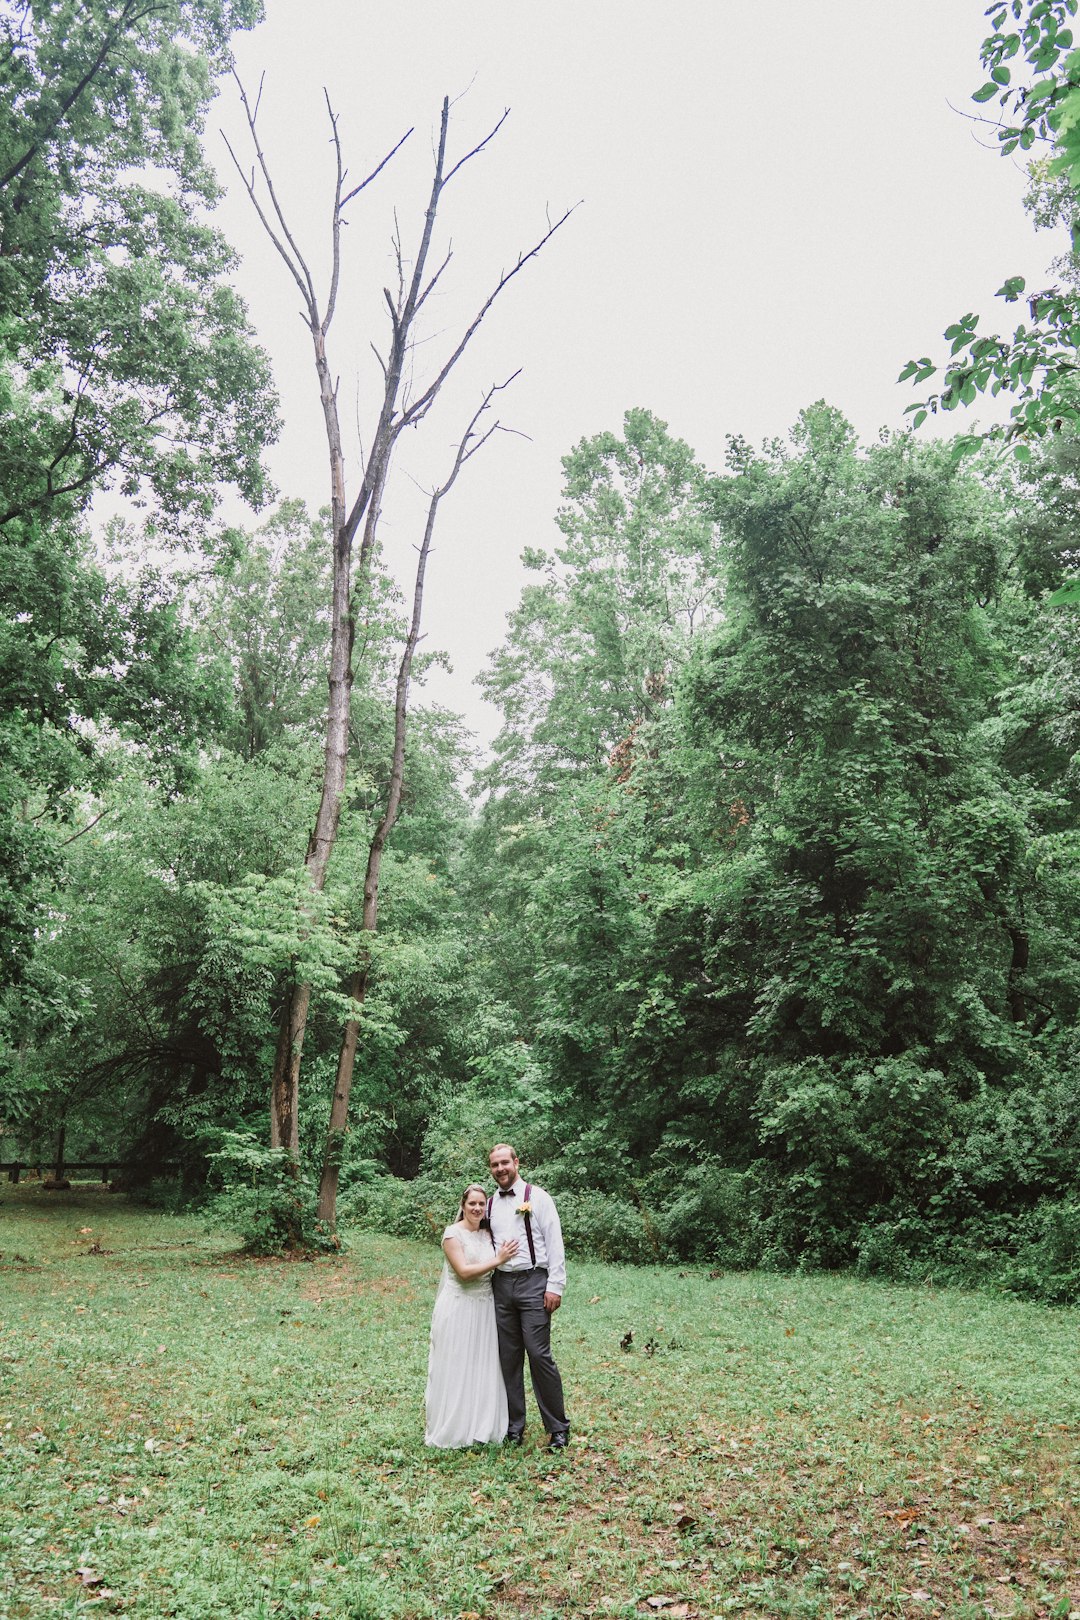 couple walking on green grass field surrounded by green trees during daytime